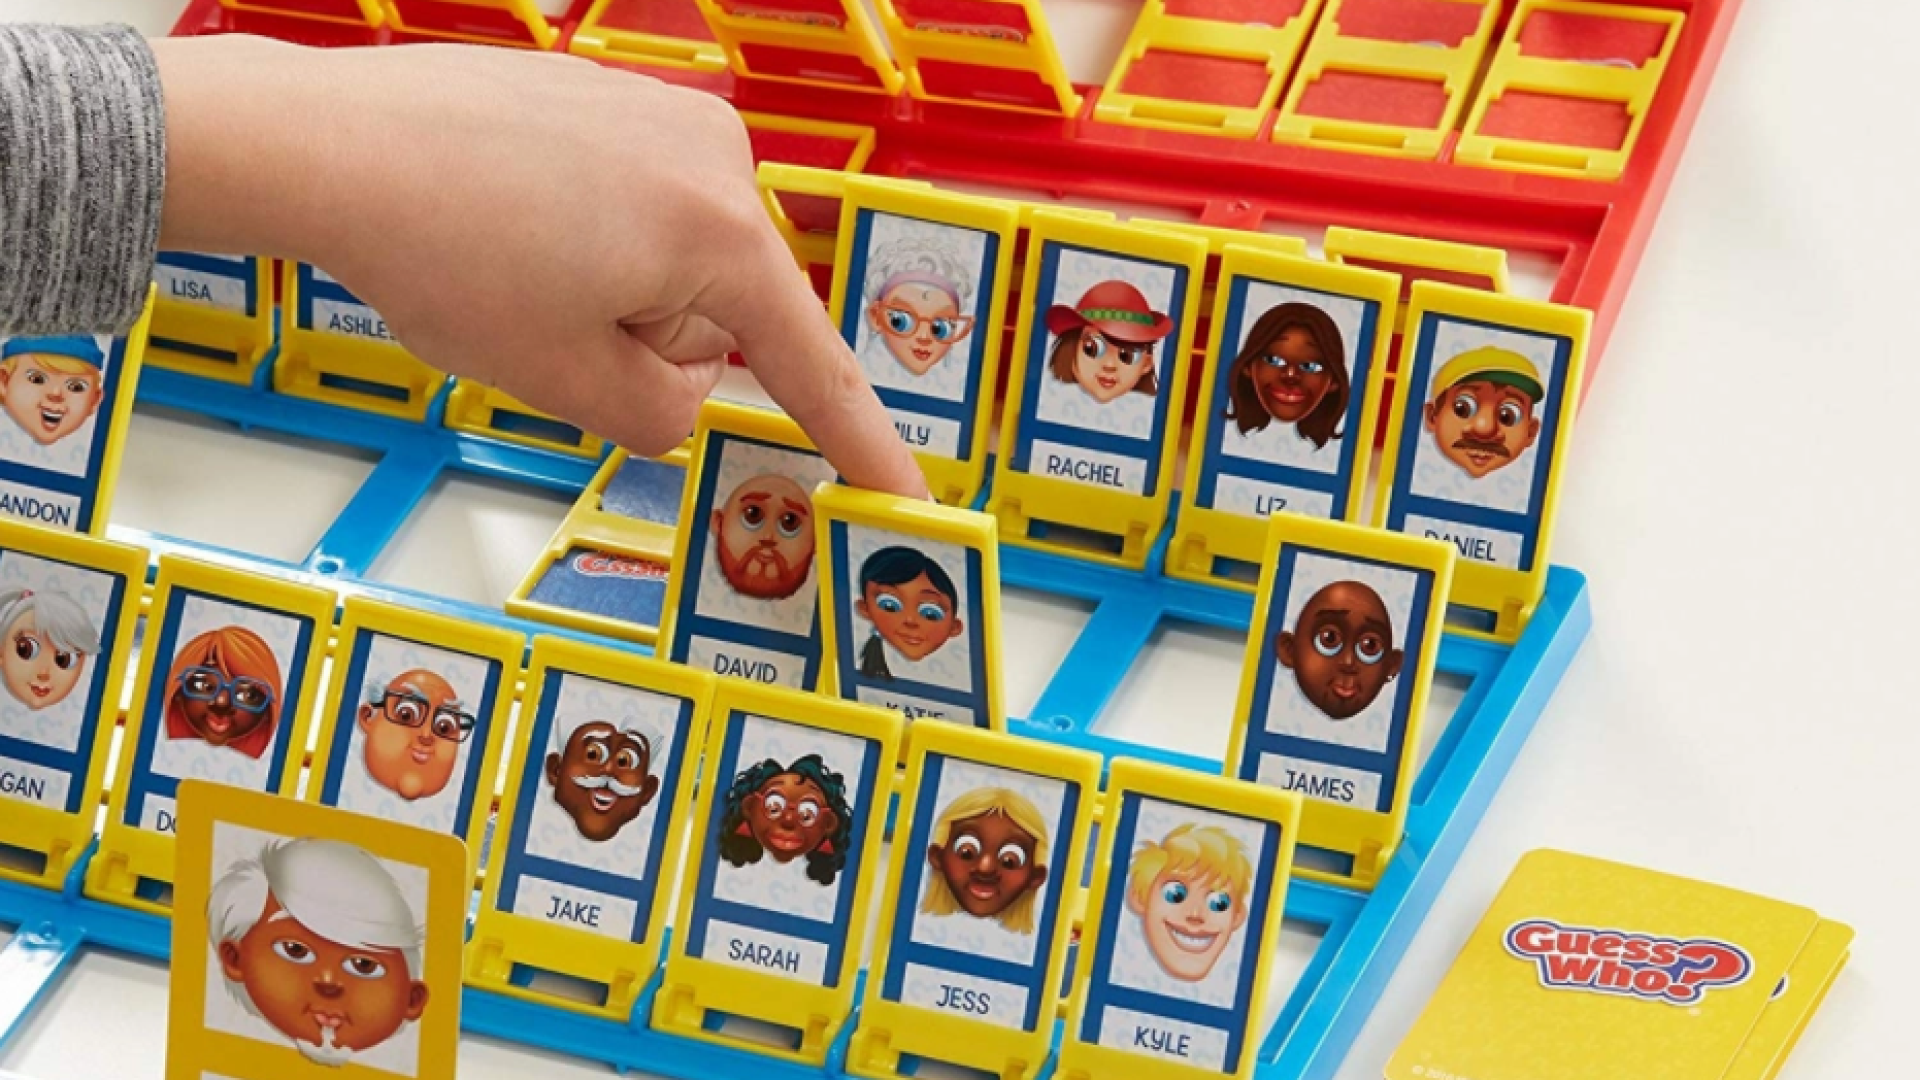 Classic board game Guess Who? is being adapted into a television game show  | Dicebreaker